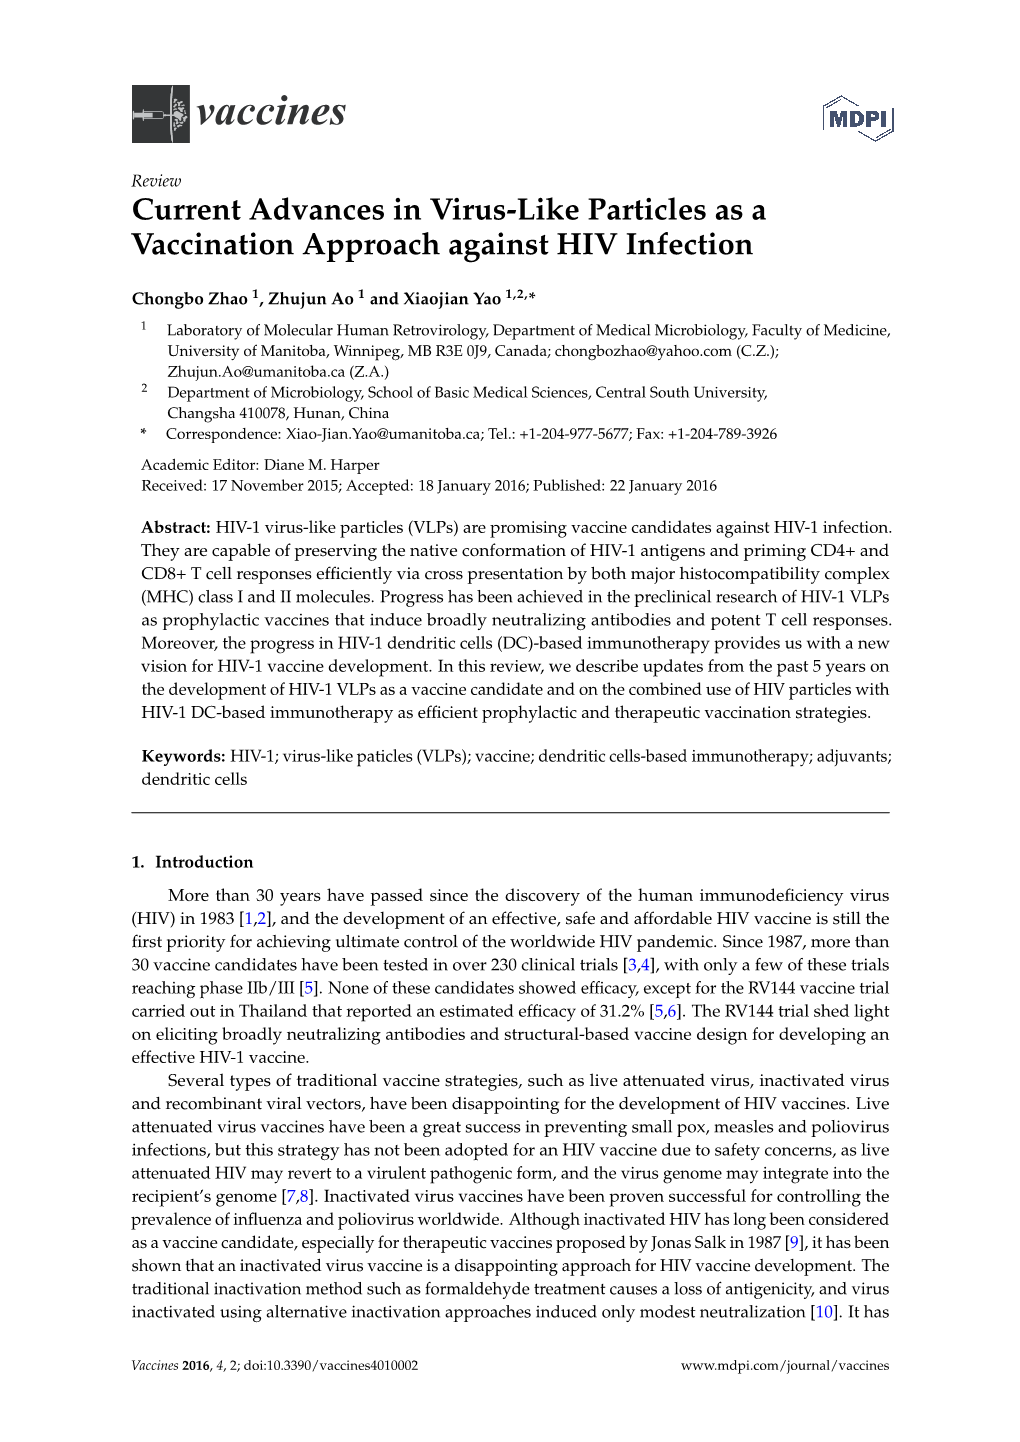 Current Advances in Virus-Like Particles As a Vaccination Approach Against HIV Infection